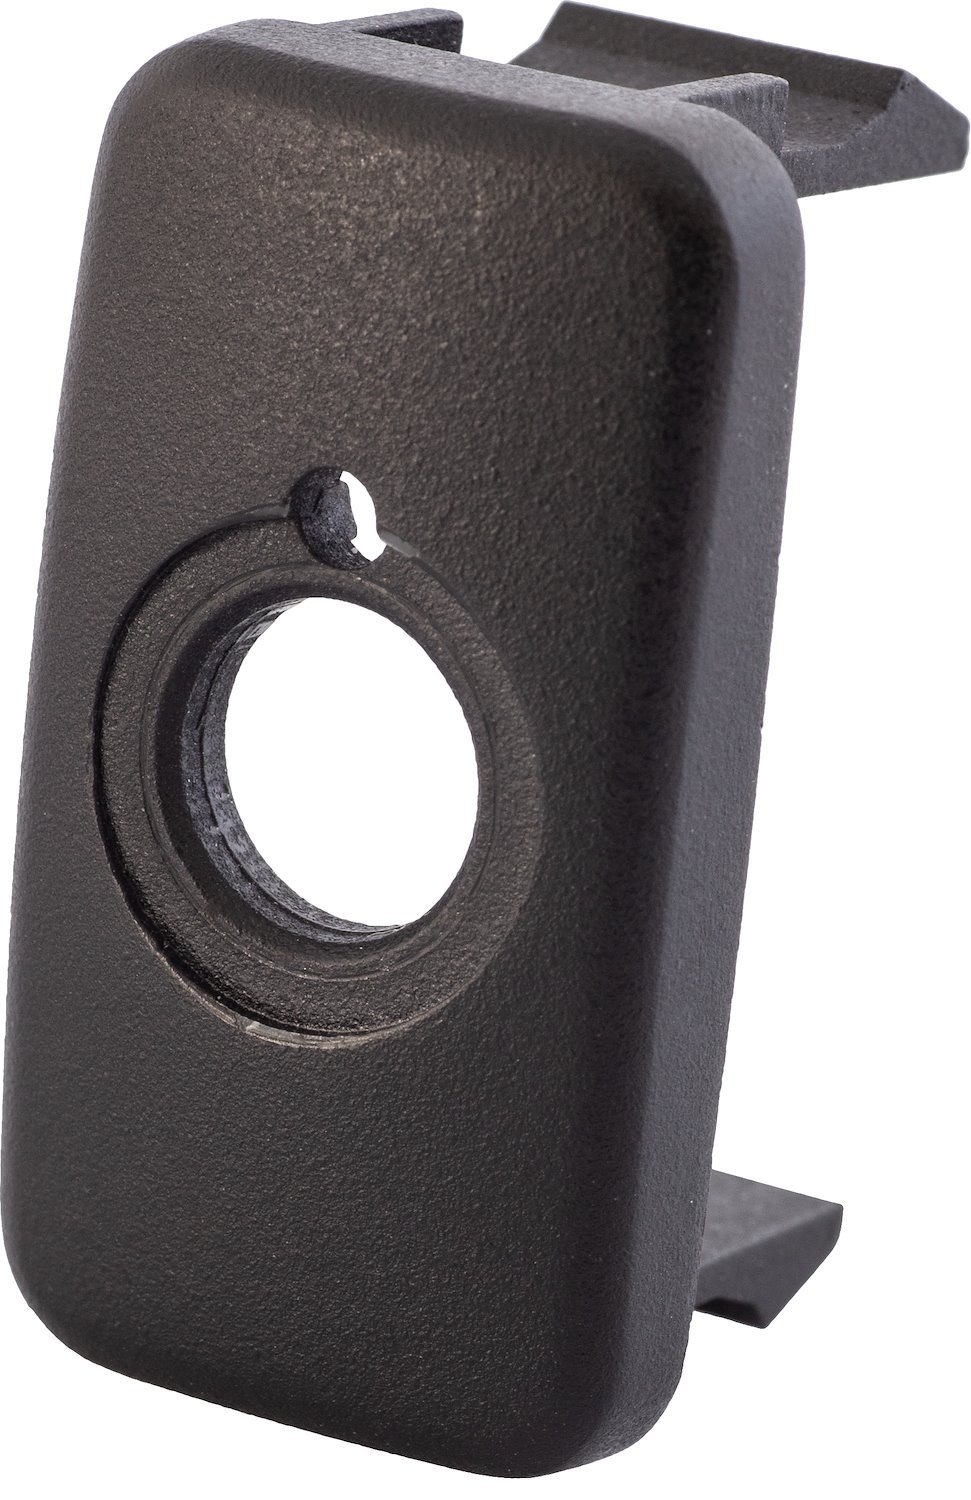 TPSI-007 Tow-Pro Switch Insert #7